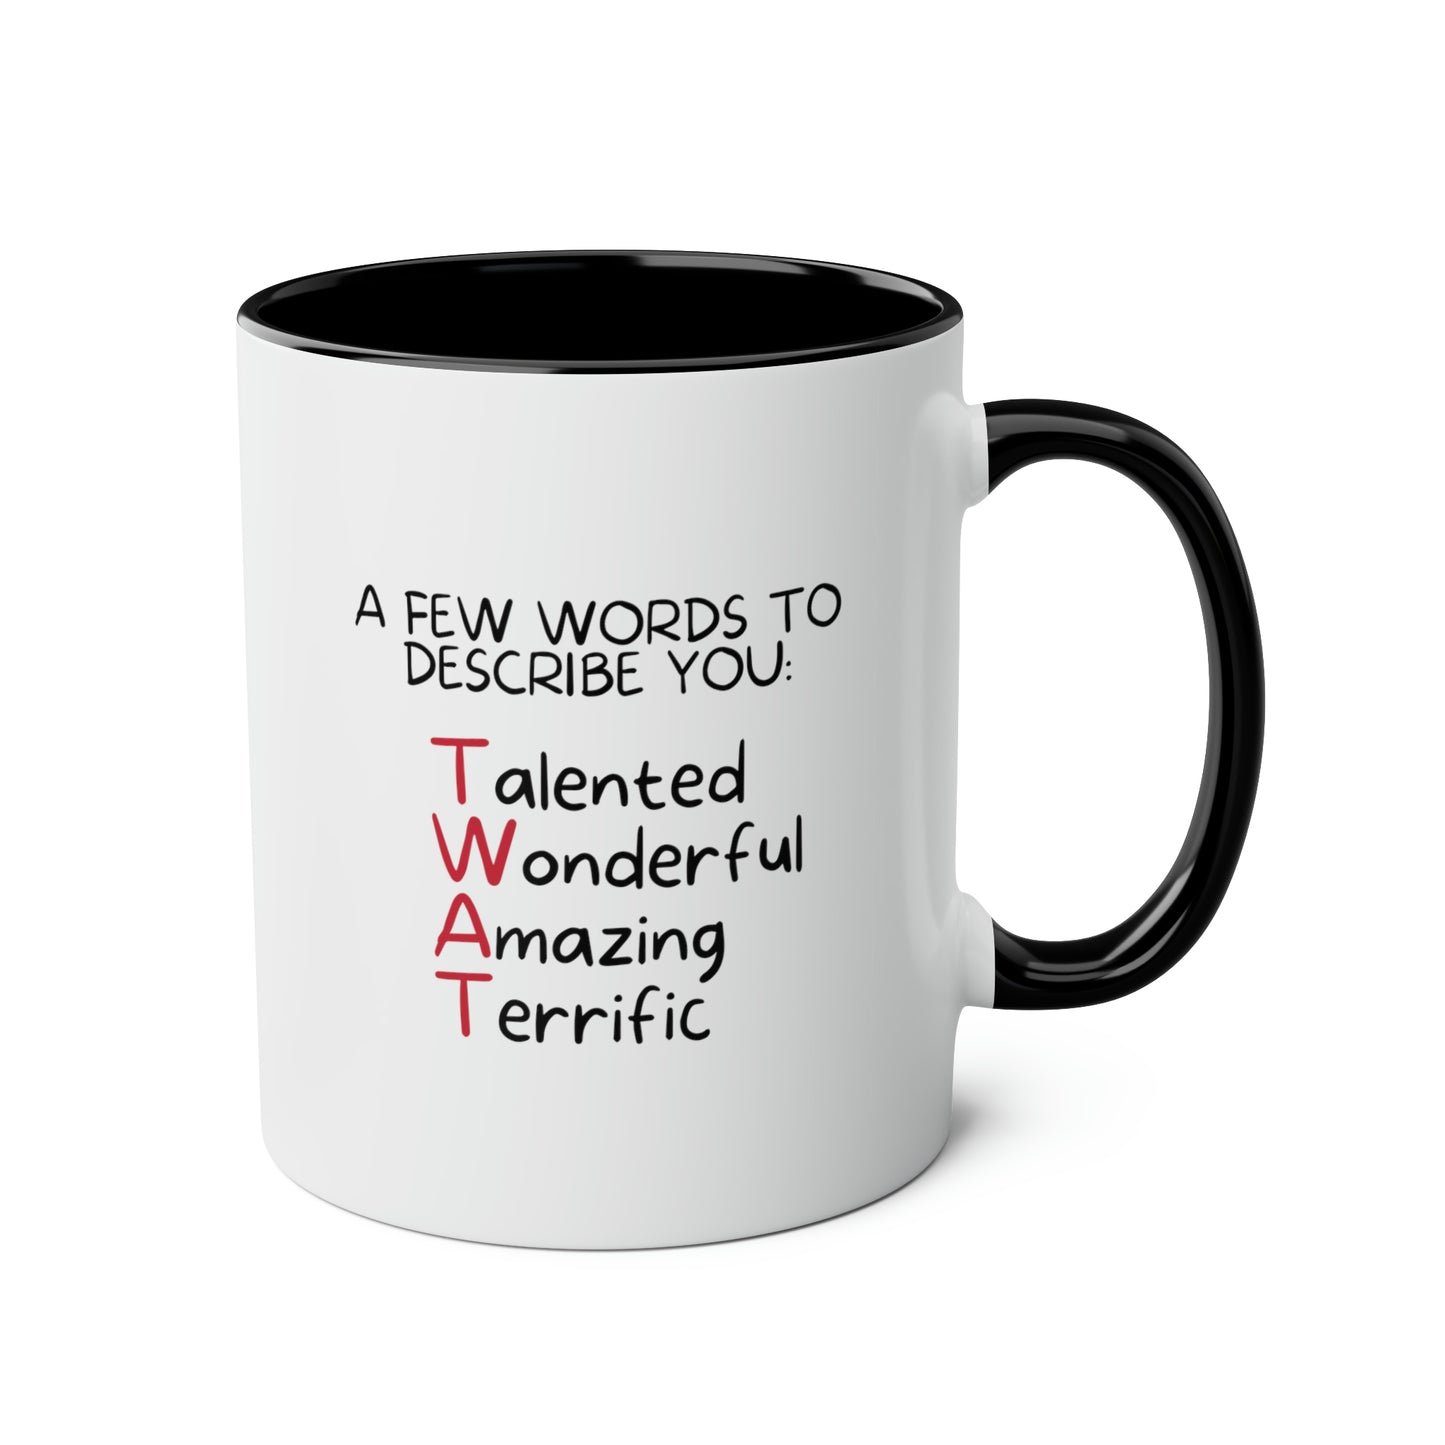 A Few Words To Describe You Talented Wonderful Amazing Terrific 11oz white with black accent funny large coffee mug gift for coworker sarcastic office rude boss work waveywares wavey wares wavywares wavy wares